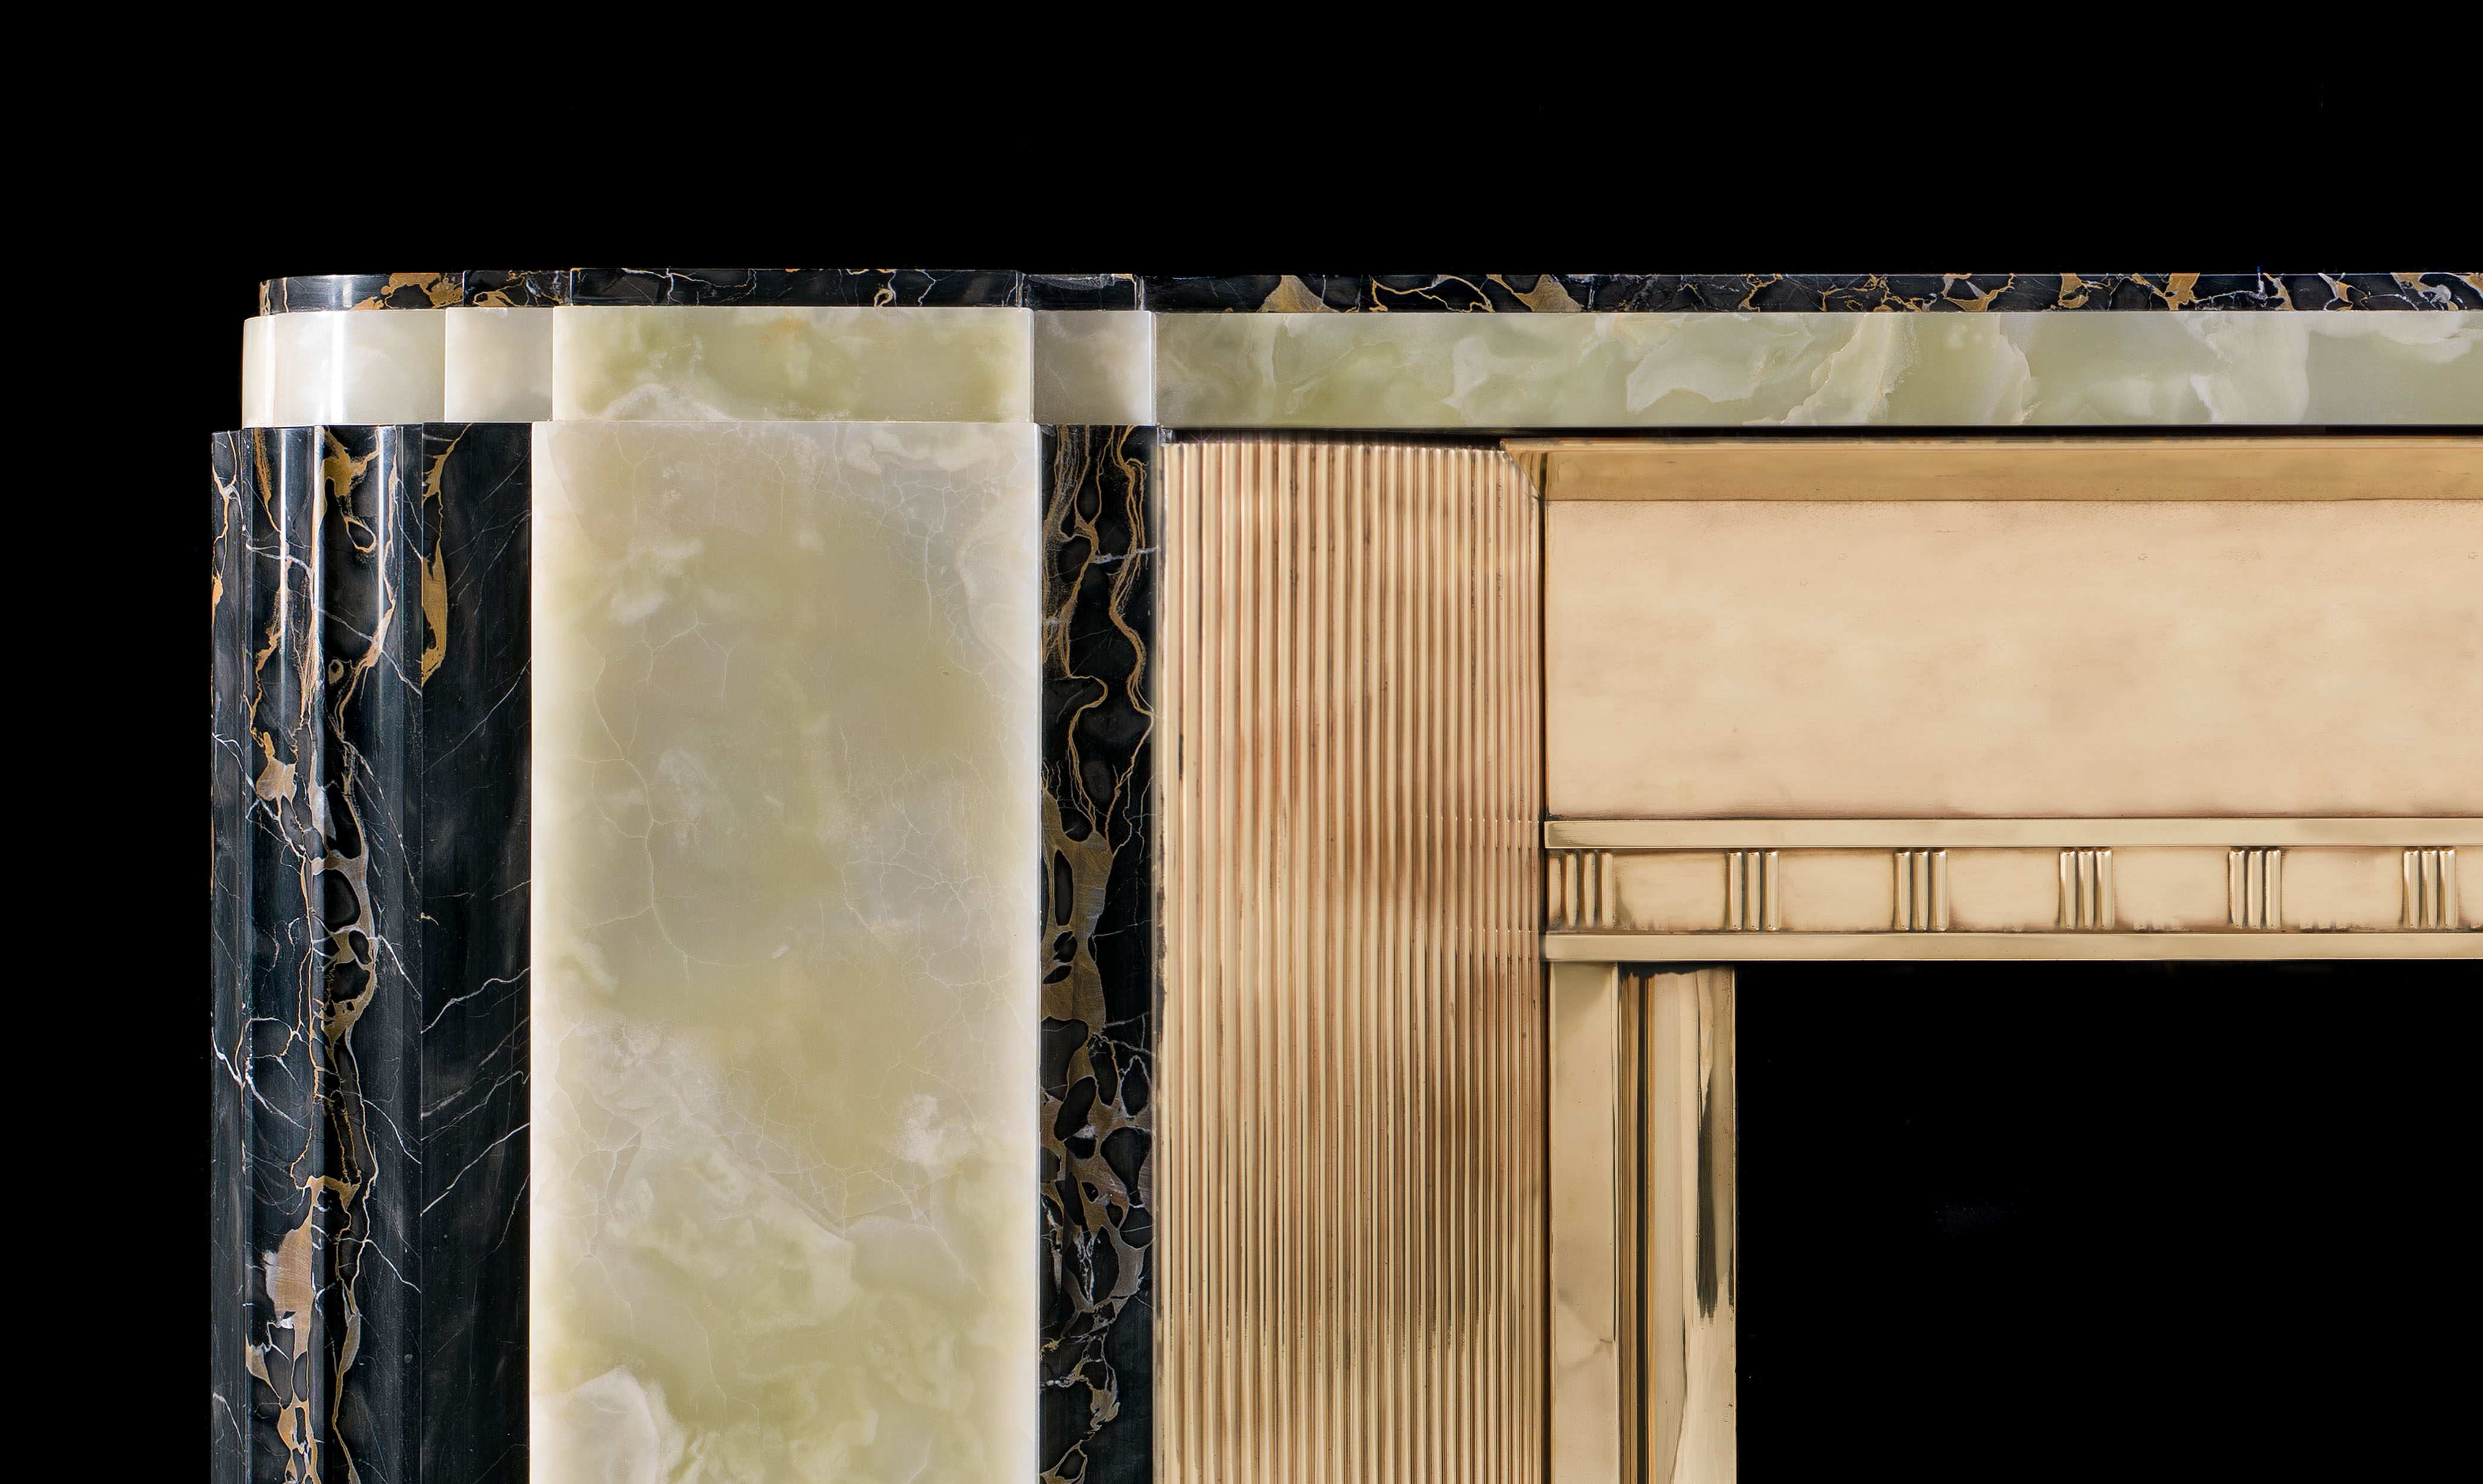 Low and wide 1930's Art Deco marble fireplace surround    